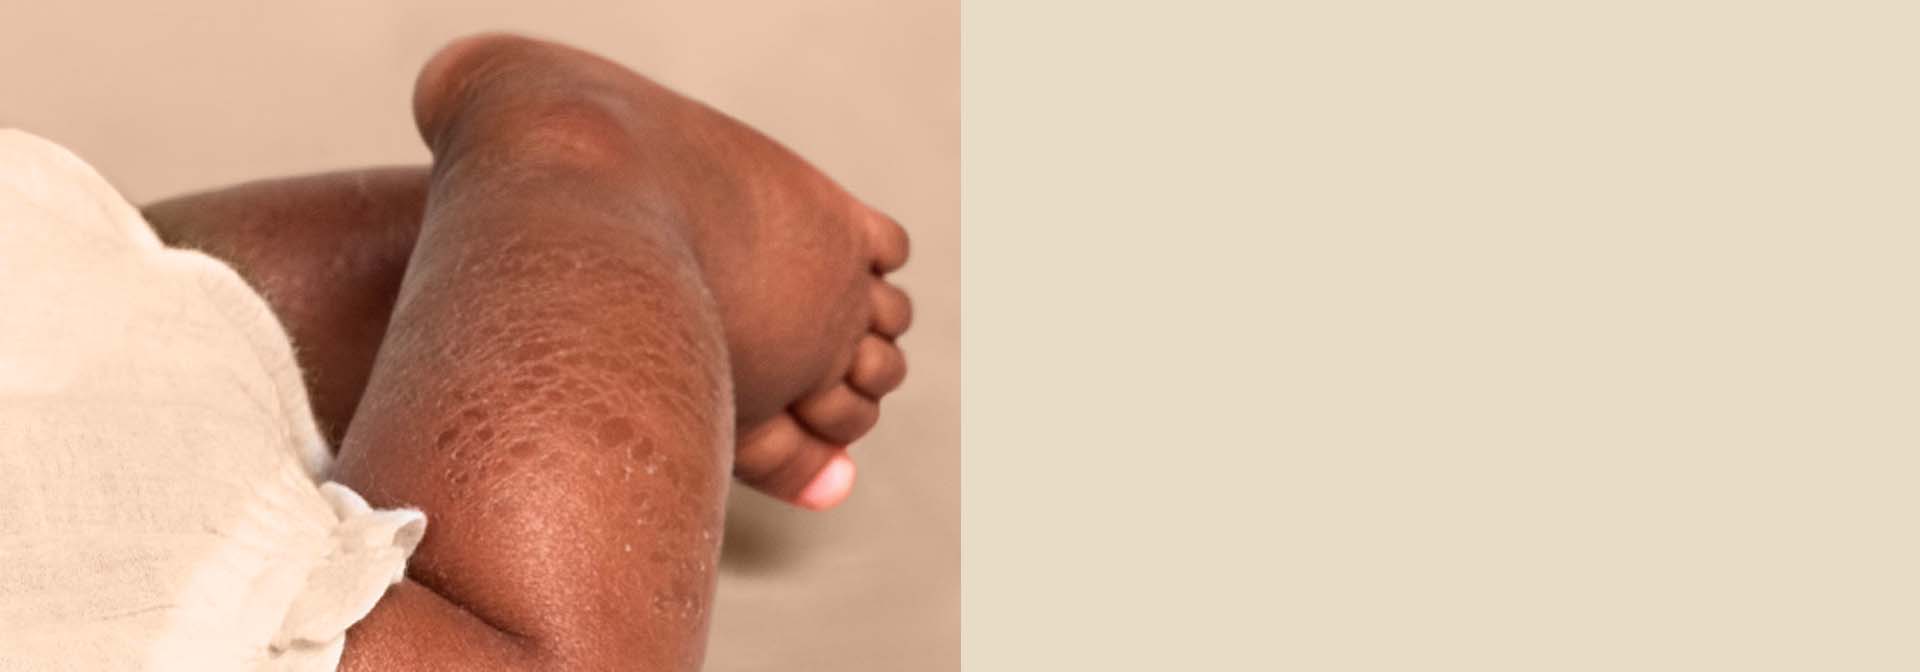 A baby’s lower leg showing signs of eczema